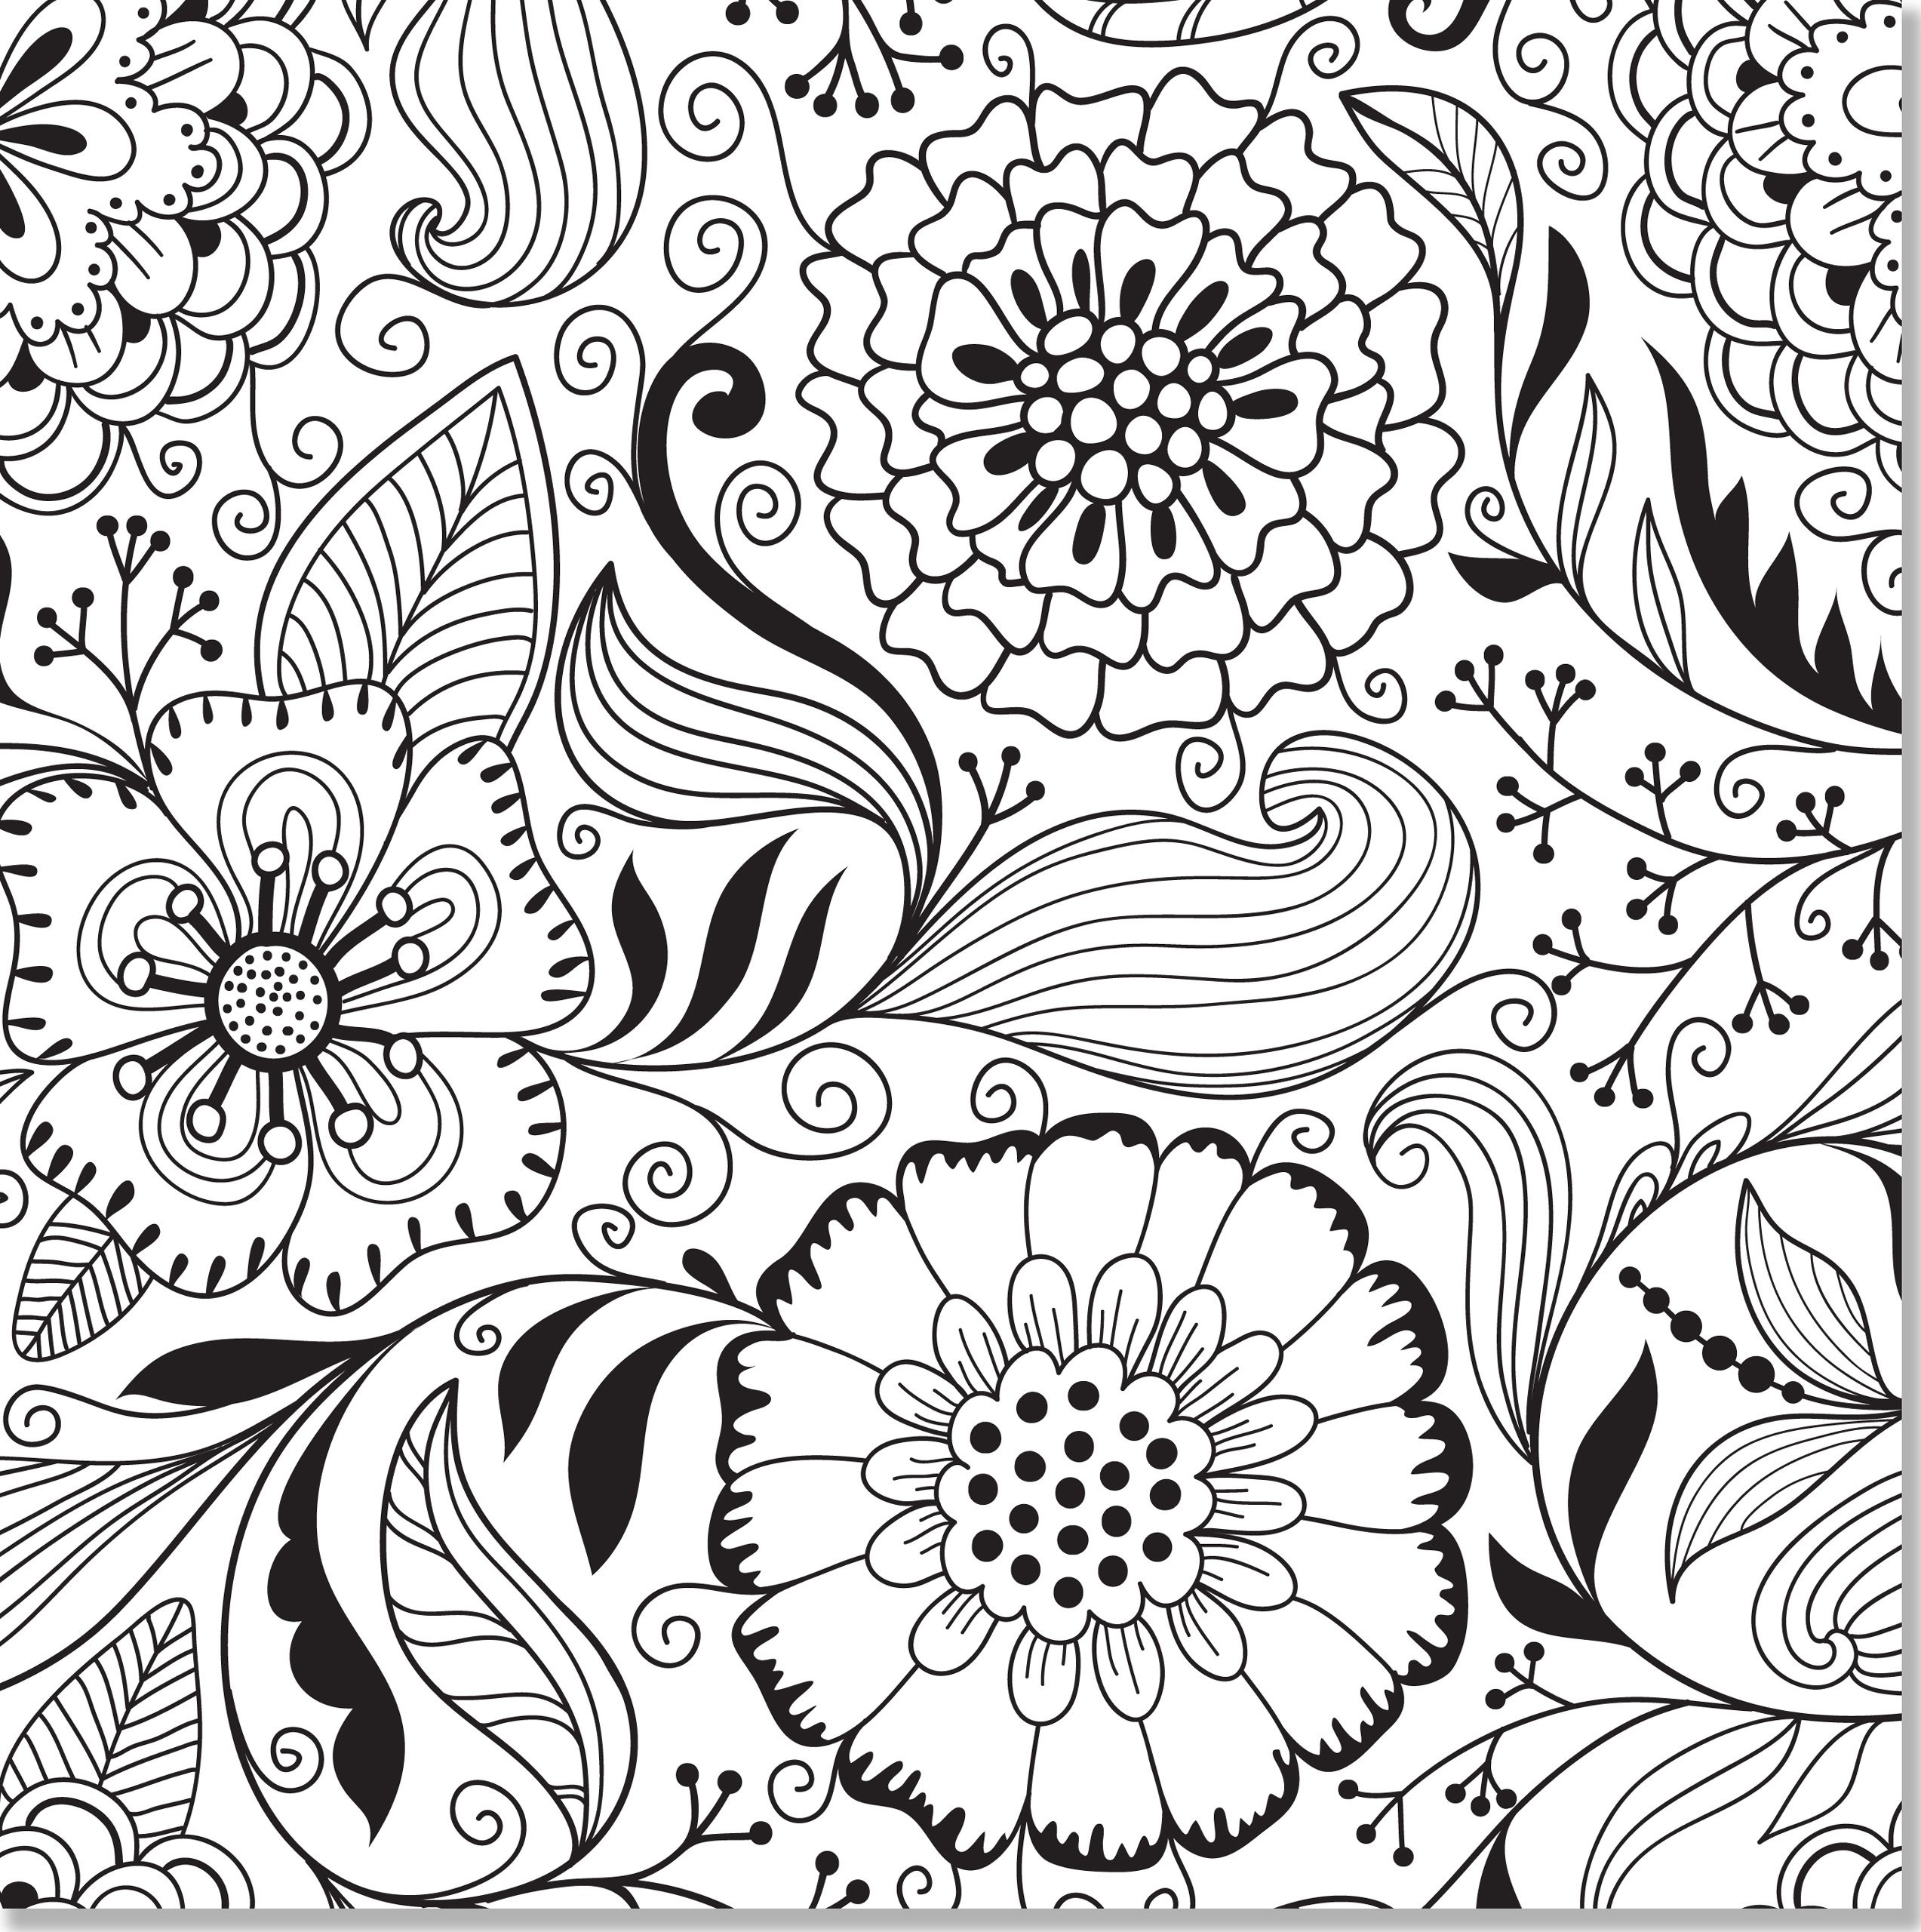 Awesome Free Printable Coloring Book Pages For Adults | Coloring Pages - Free Printable Coloring Designs For Adults